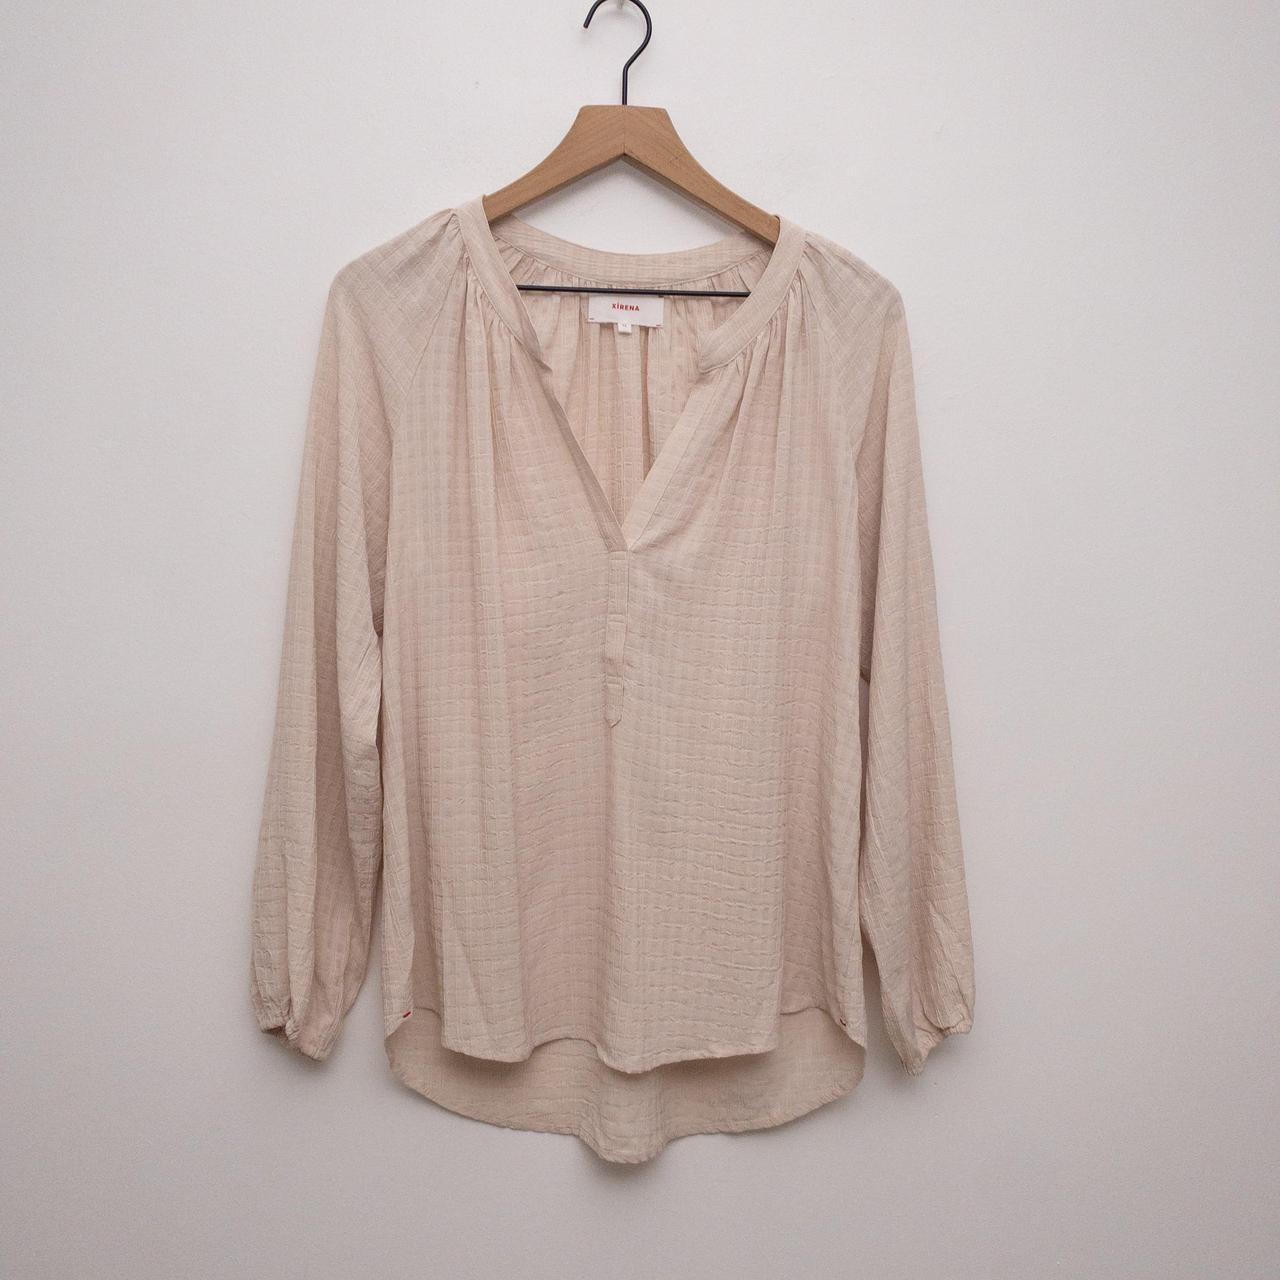 XIRENA Women's Pink and Cream Blouse